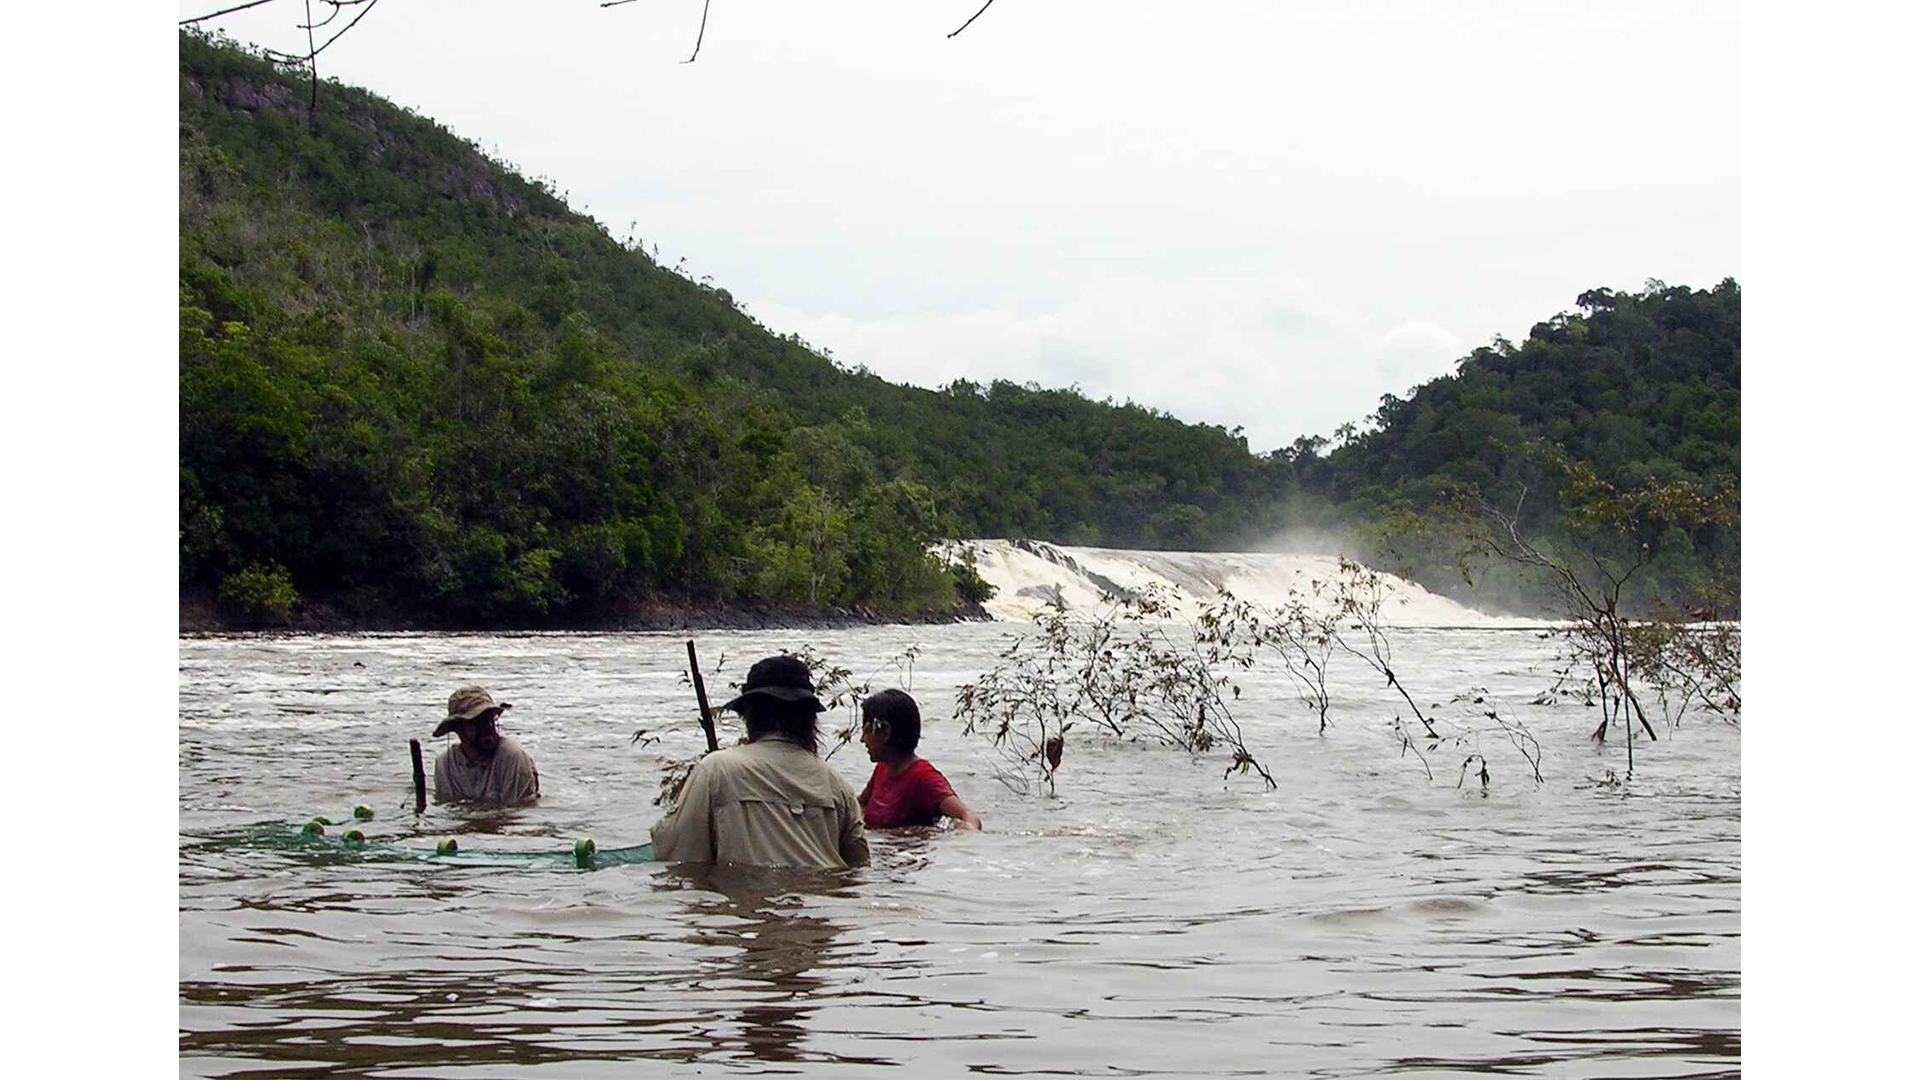 Teammates Tim Wesley and Mariangeles Arce (right) help the author drag a net through the flooded habitat downstream of Salto de Oso.